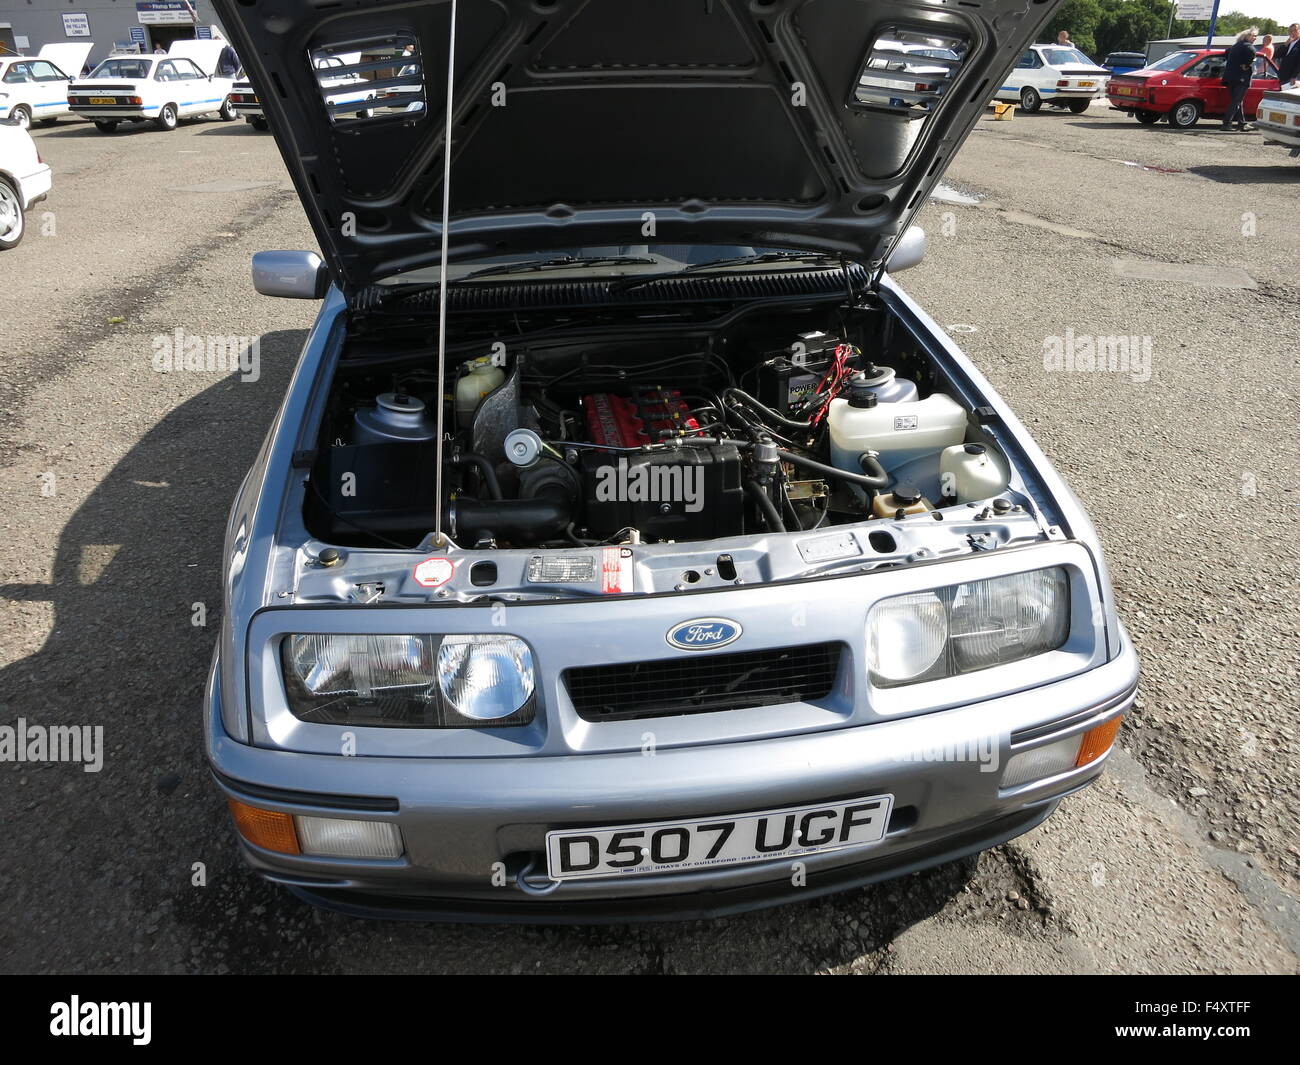 Ford Sierra RS Cosworth In moonstone blue at donnington park car event mk1 1st generation Stock Photo